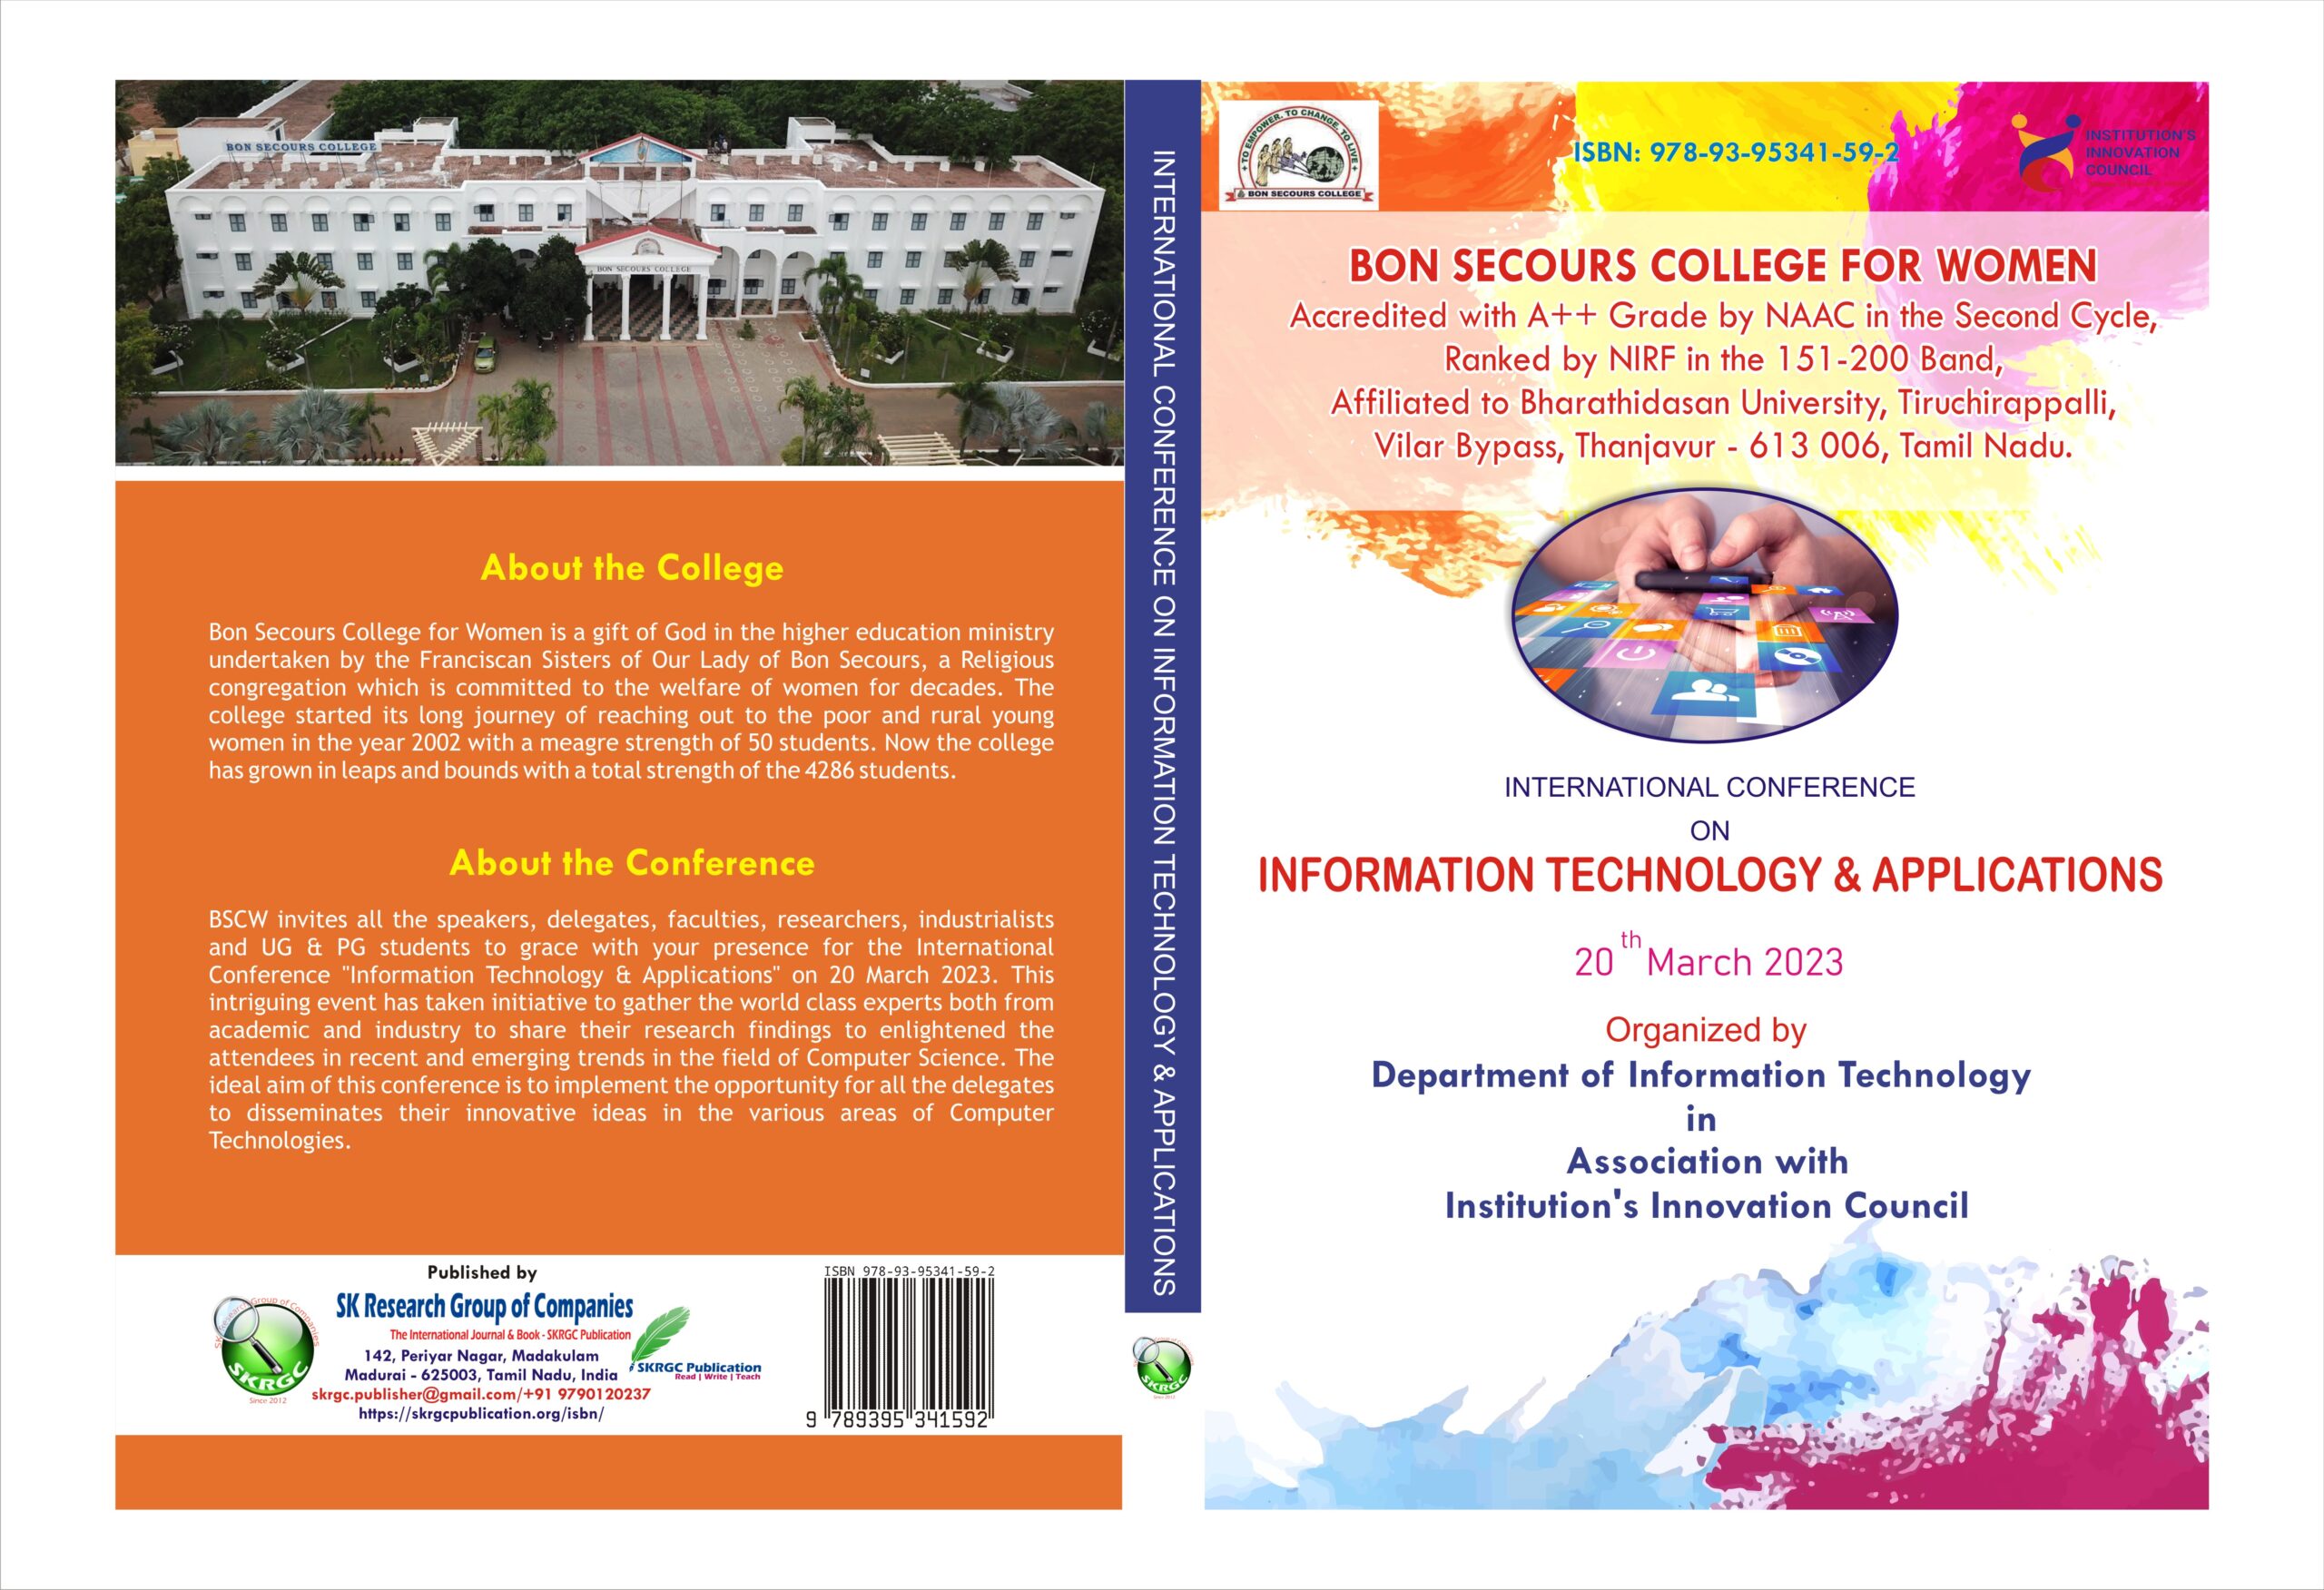 International Conference on Information Technology & Applications.